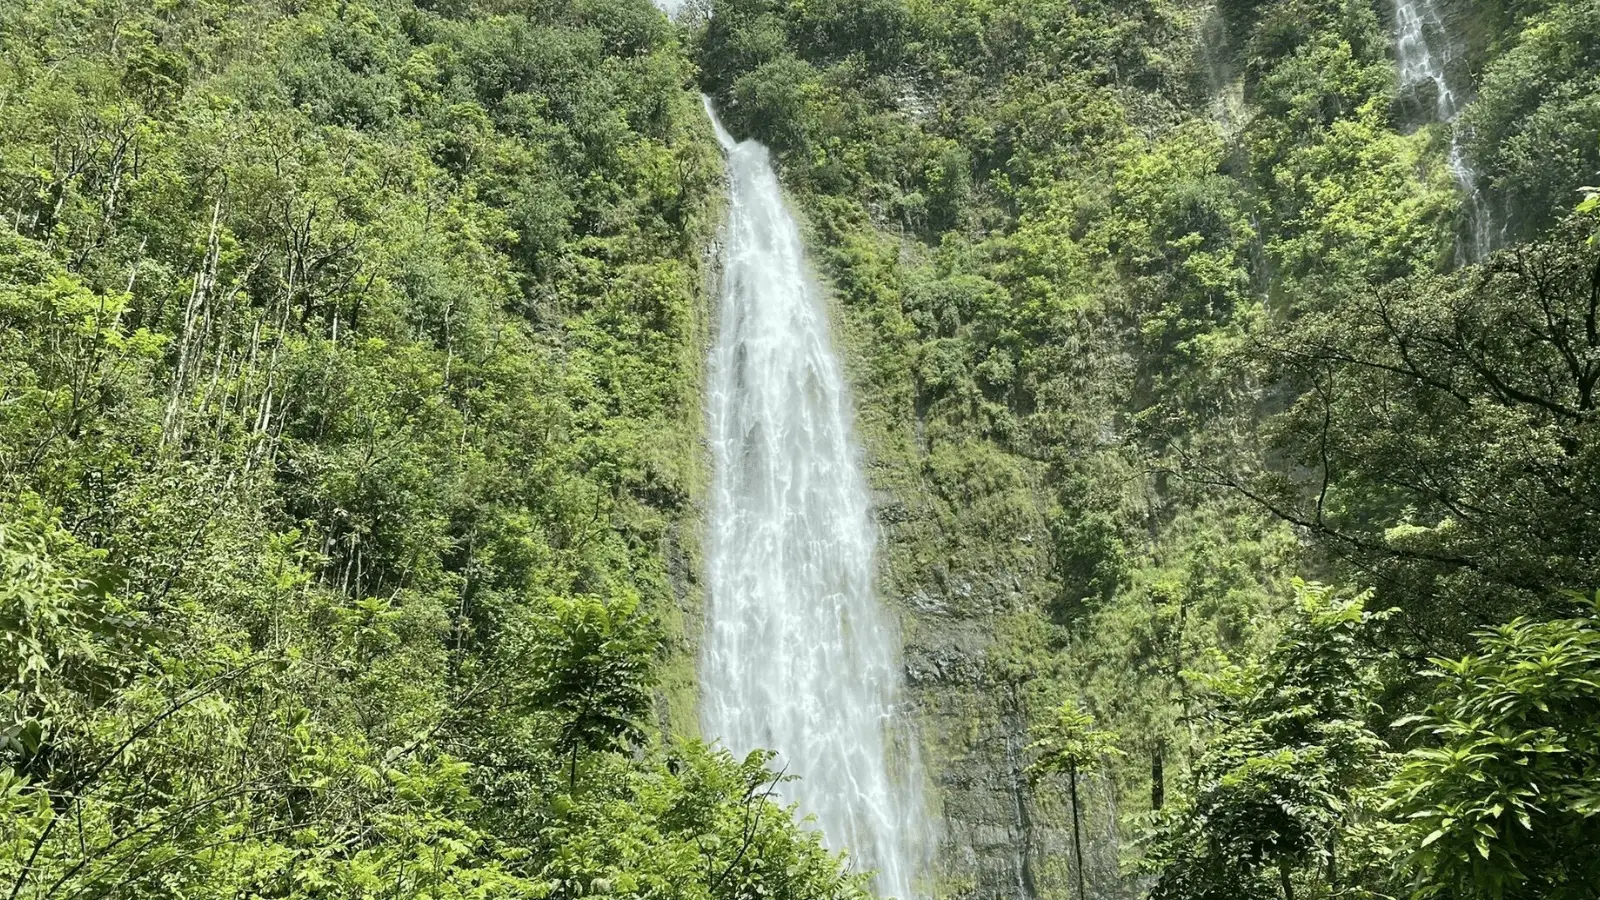 A tall, vertical waterfall cascades down a lush, green mountainside, surrounded by dense foliage and trees. The water flows with white streaks, contrasting against the vibrant greenery of the forest. Truly one of the best hikes Maui has to offer, this scene exudes tranquility and natural beauty.